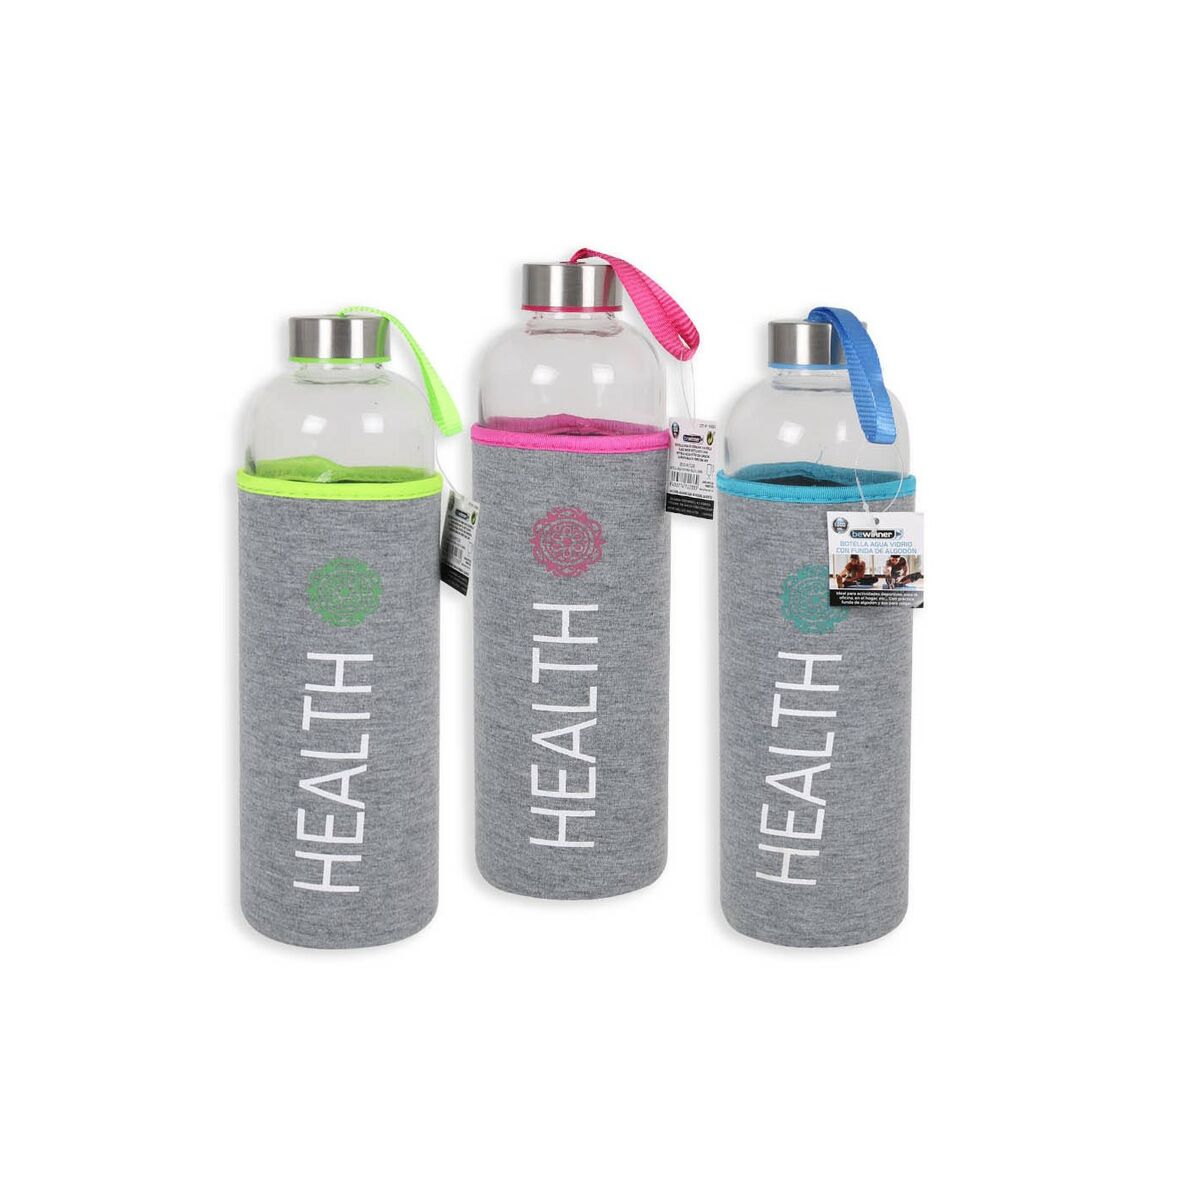 Glass Bottle with Neoprene Cover Bewinner Health 1 L (12 Units)